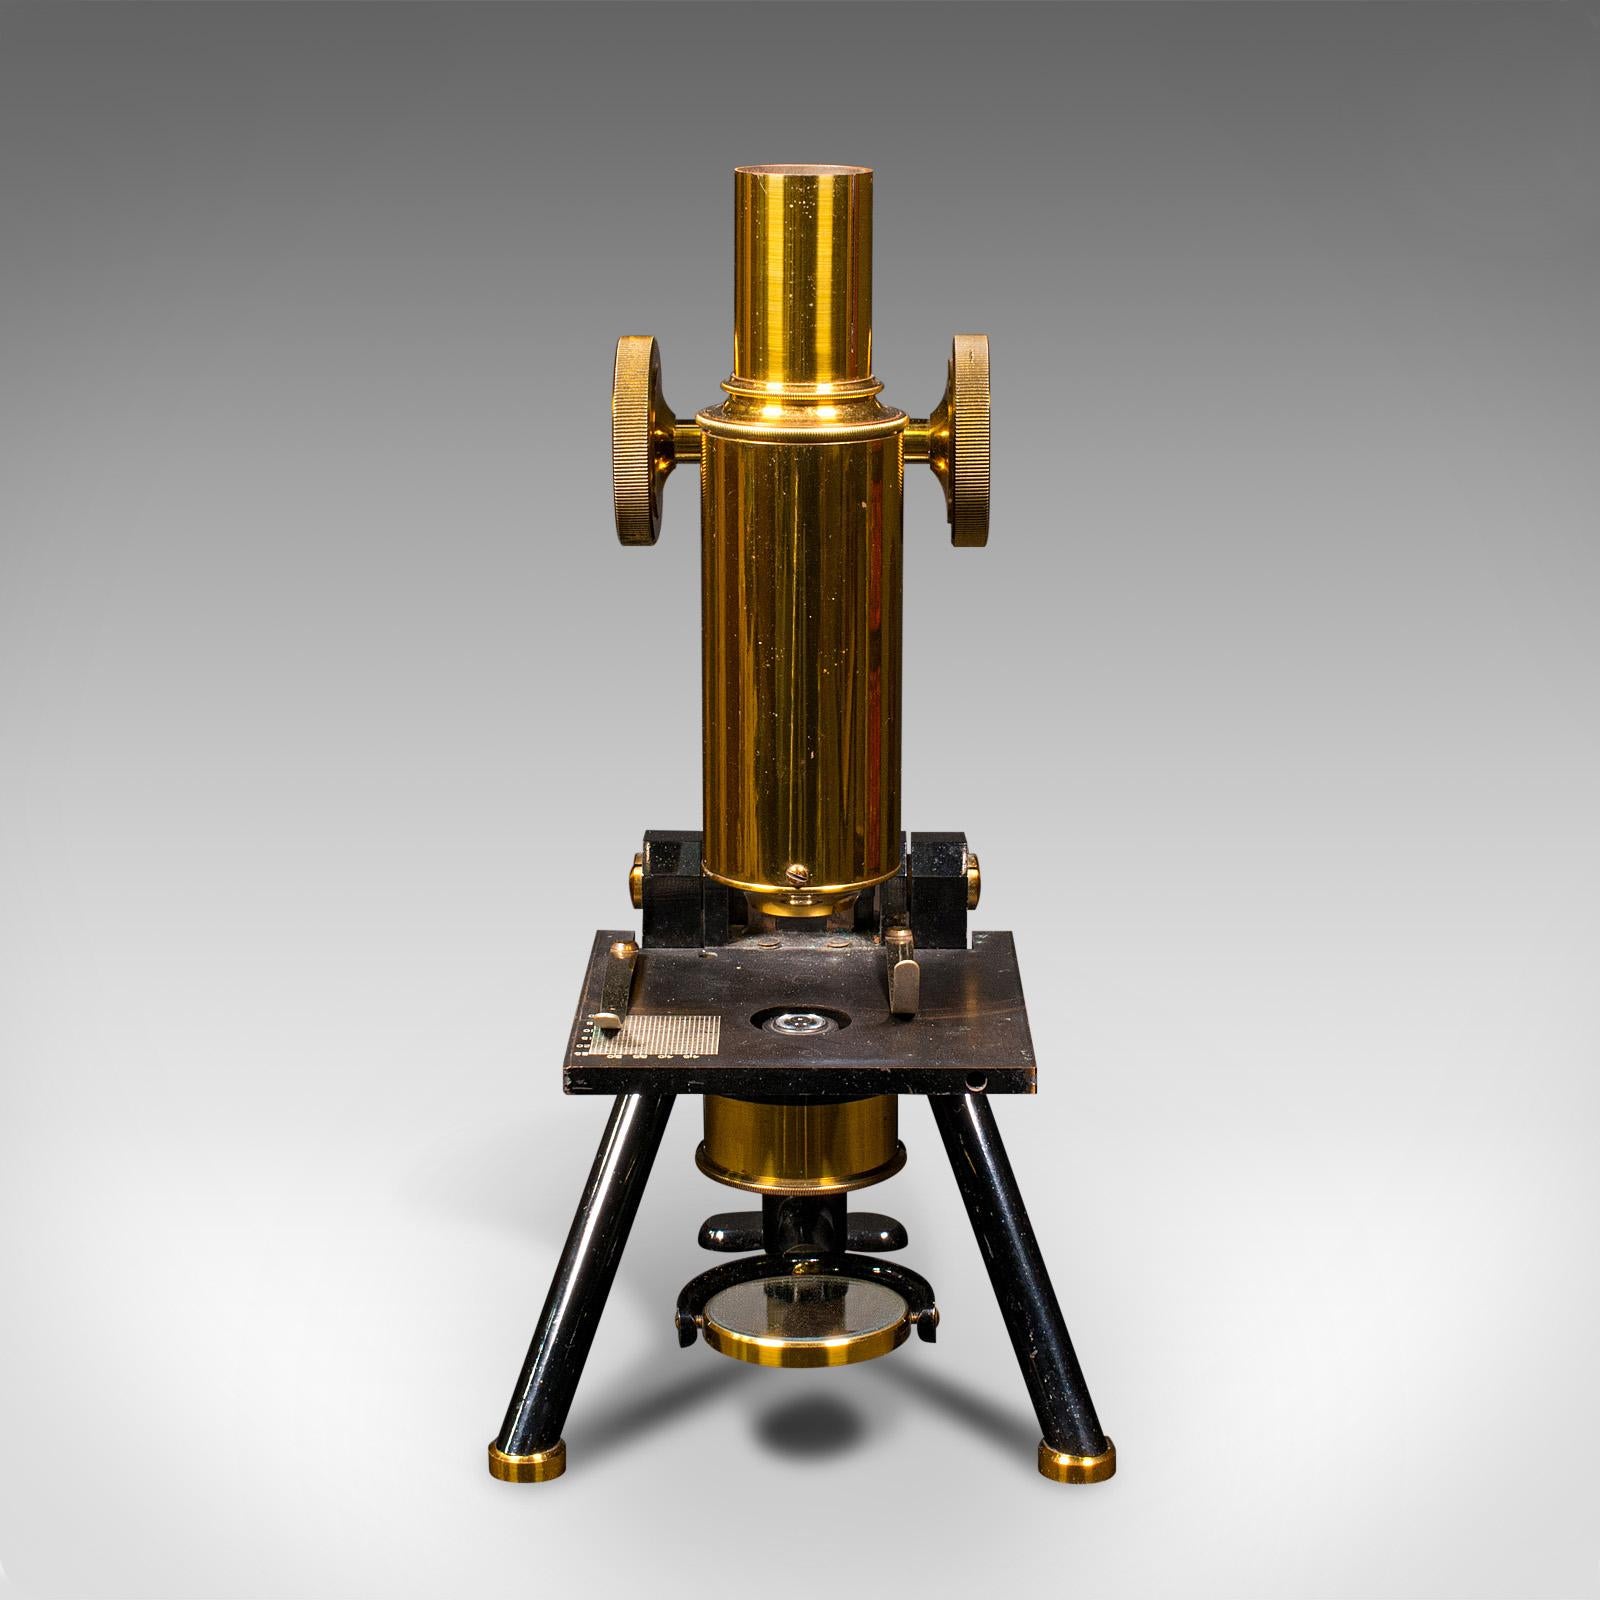 This is an antique cased microscope. An English, black enamel scientific instrument by J. Swift & Son of London, dating to the Edwardian period, circa 1910.

Nicely presented and appealing scientific instrument, ideal for display
Displaying a